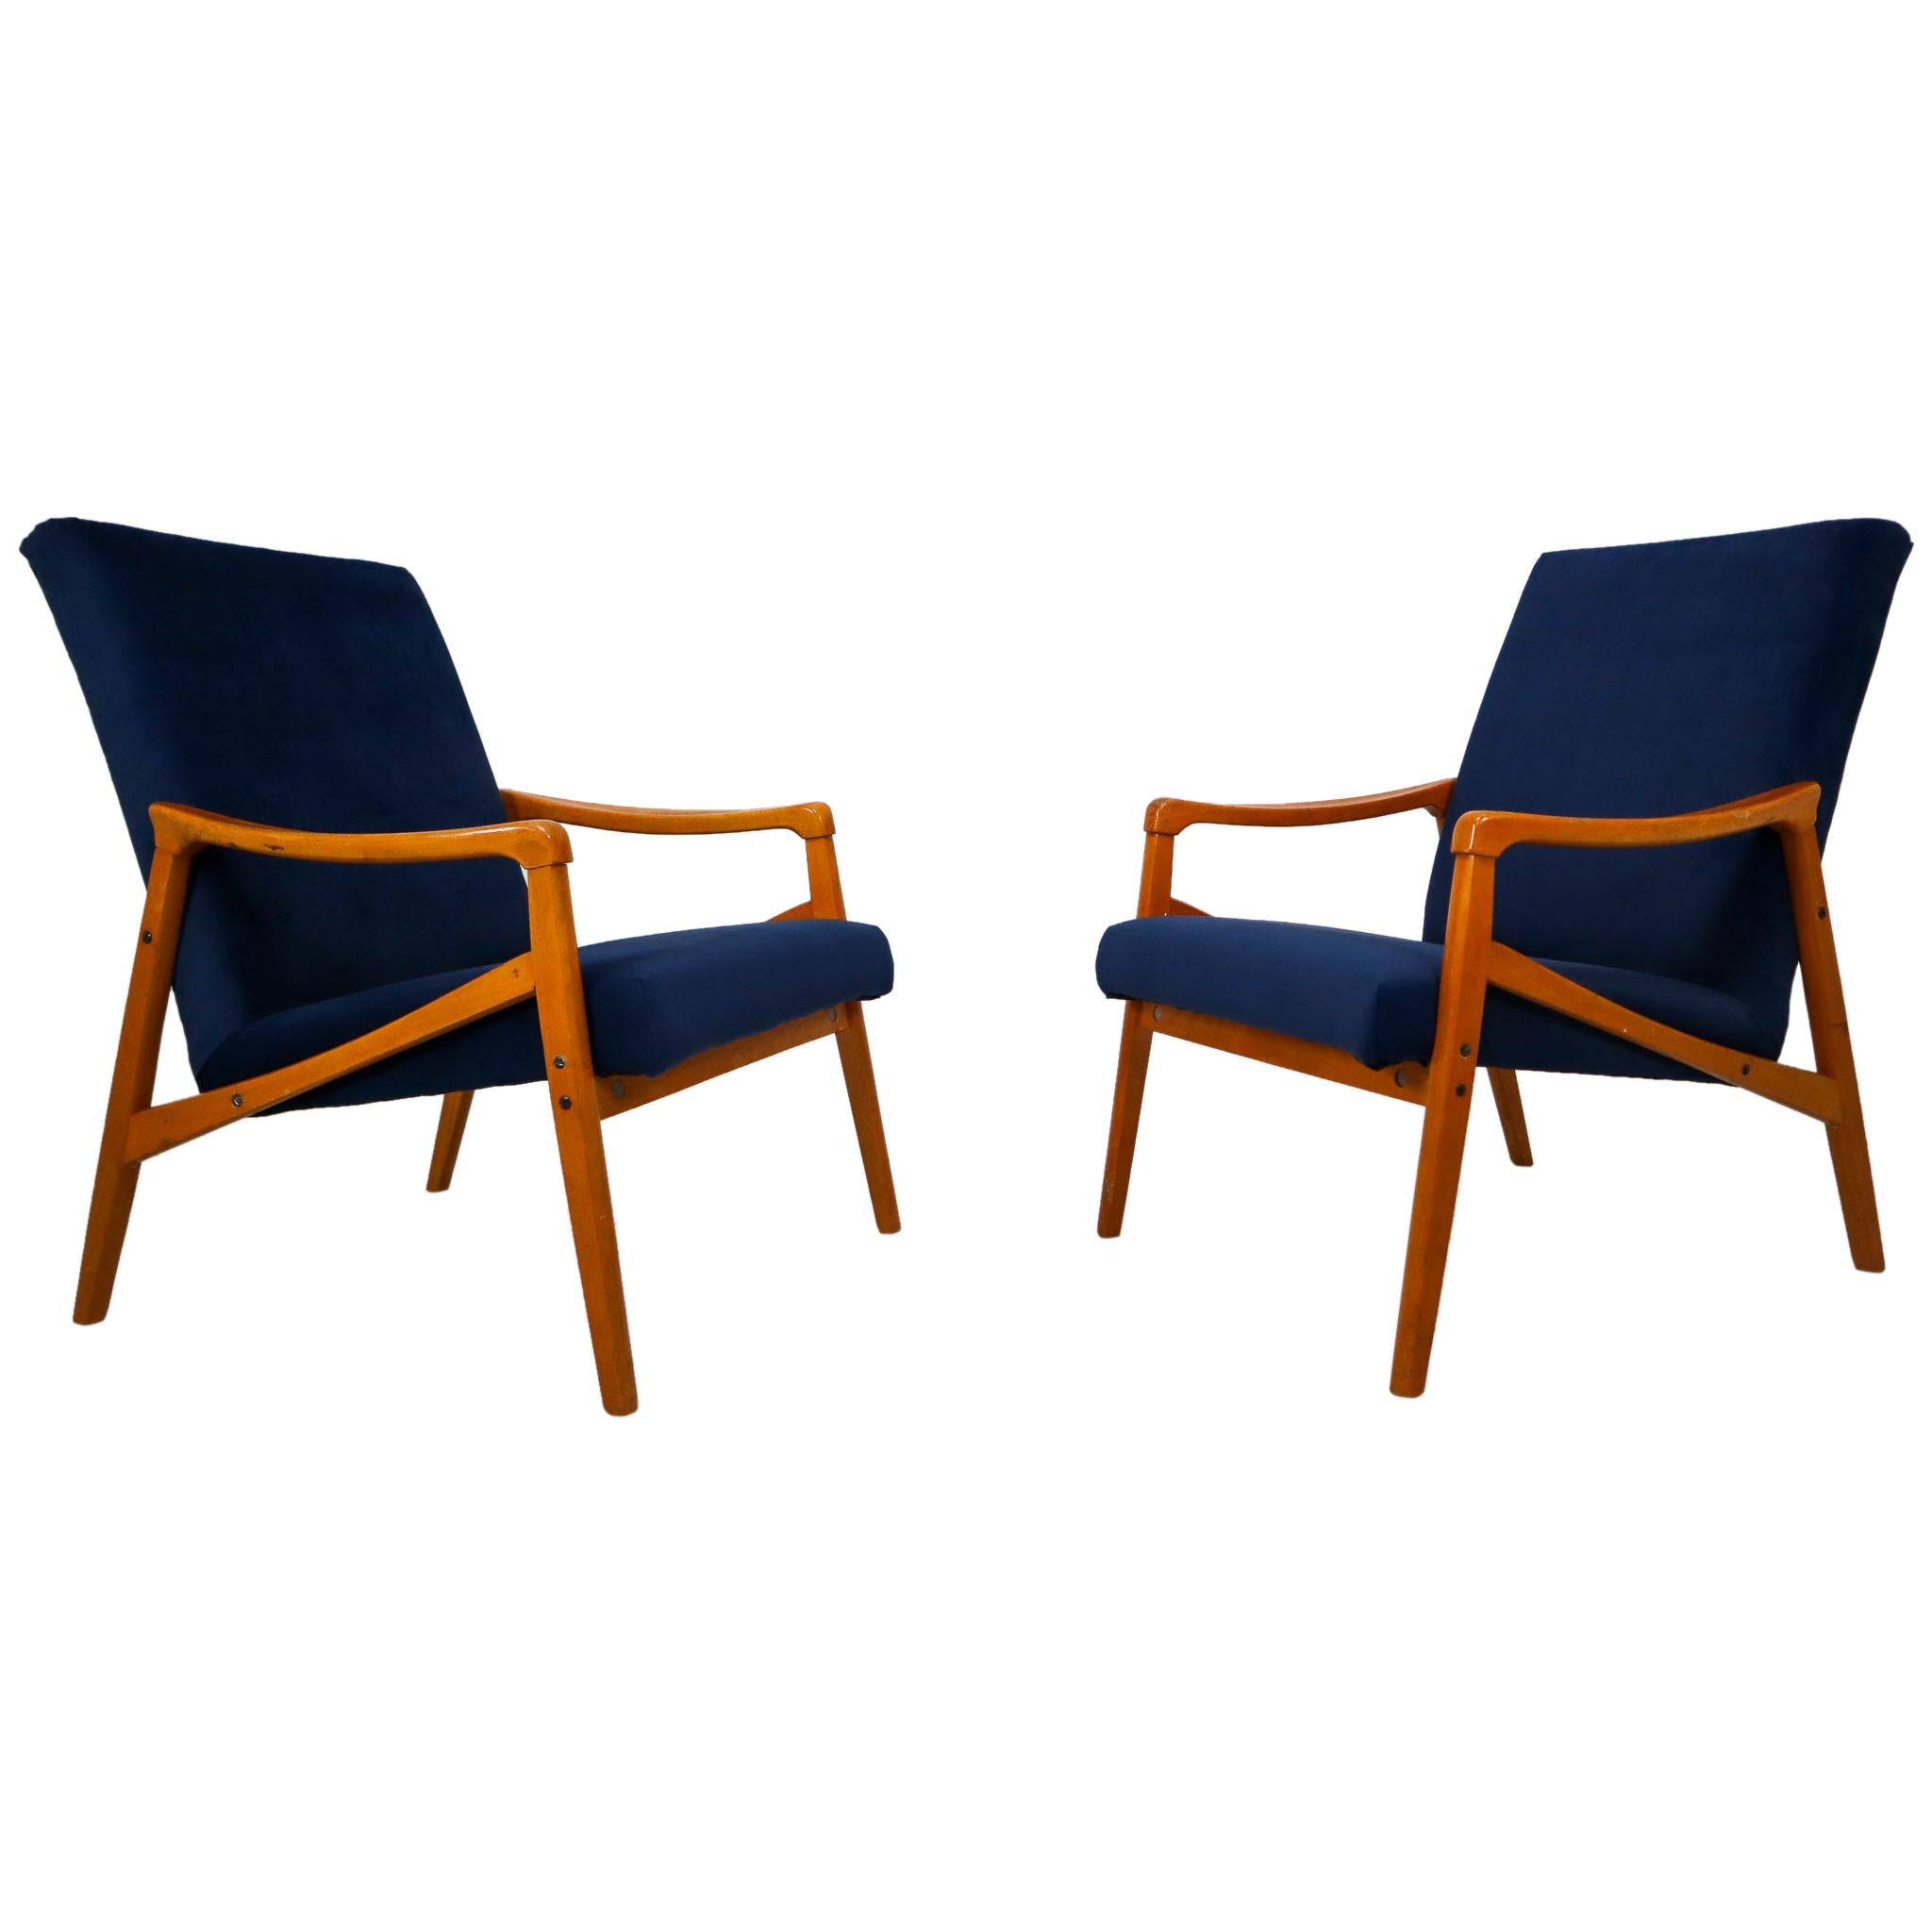 Midcentury Reupholstered Lounge Chairs in Blue Velvet, Czech Republic, 1970s